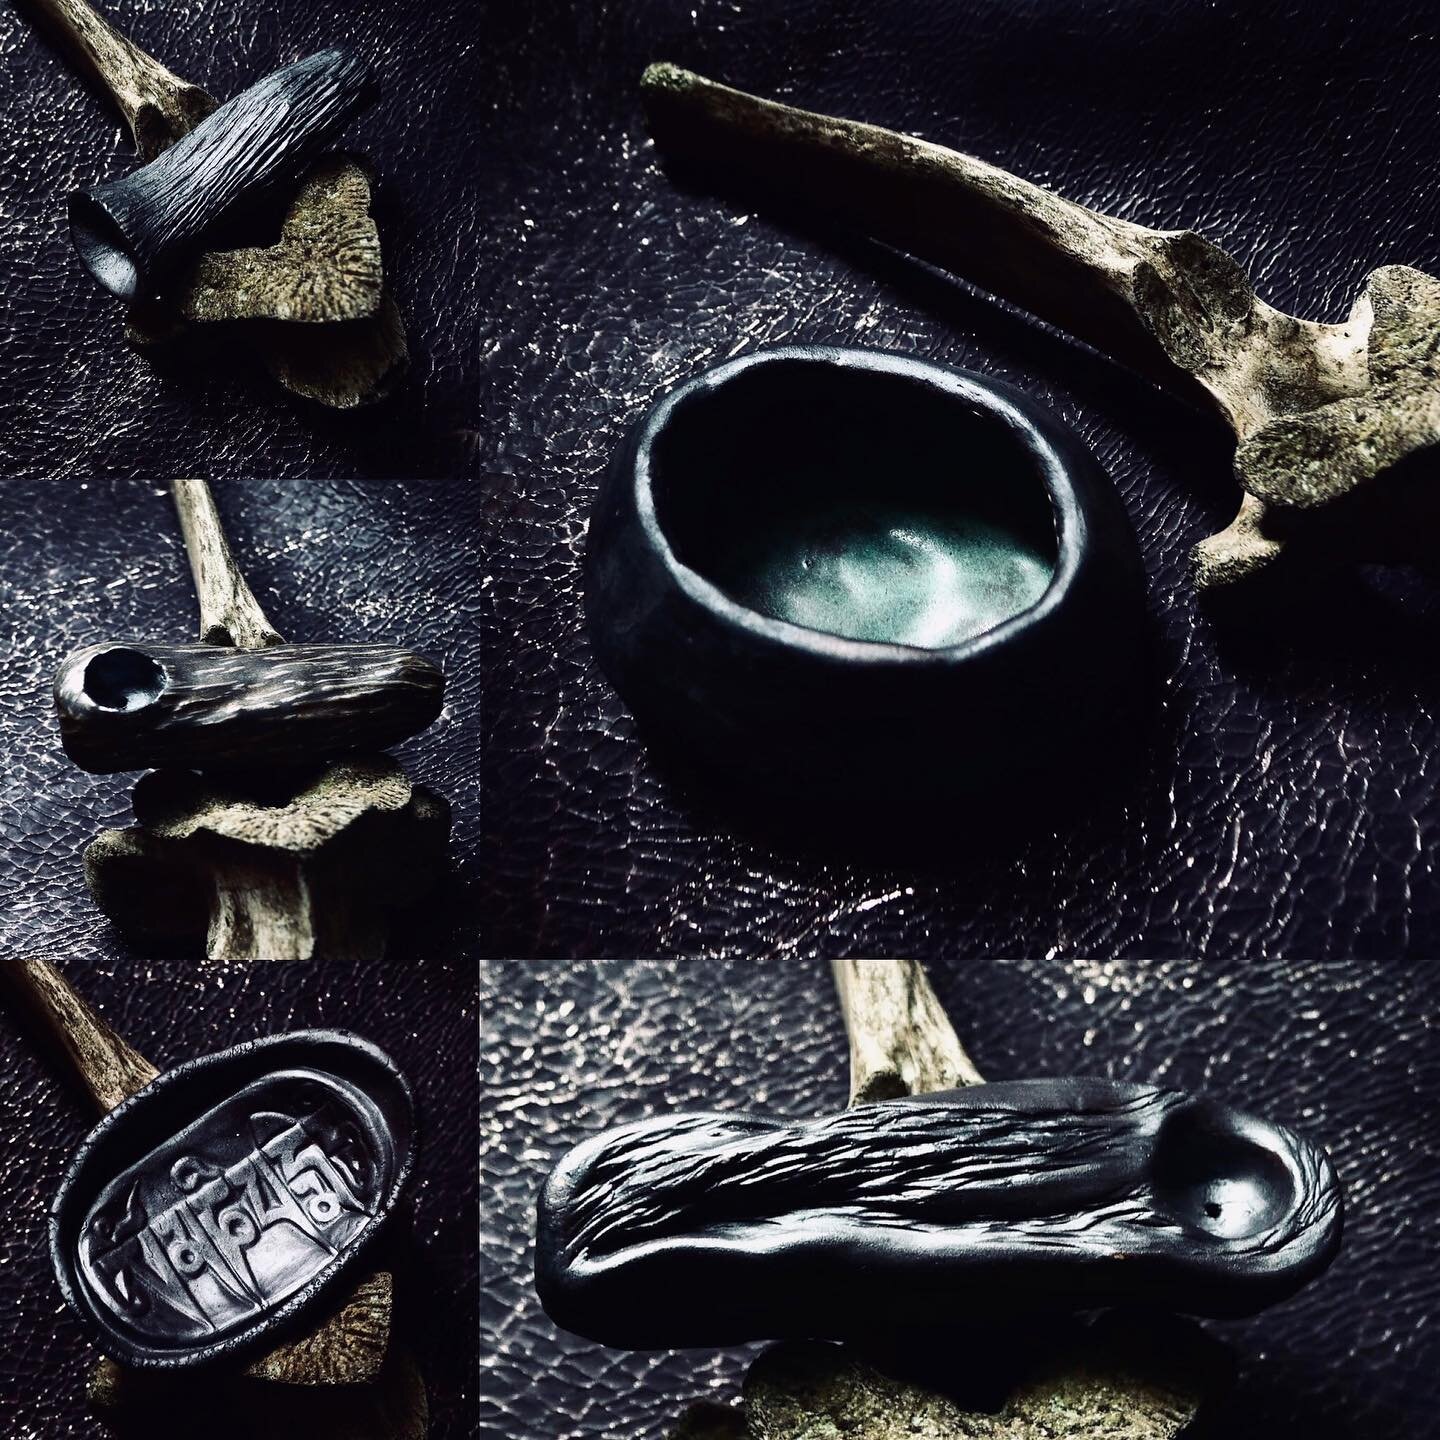 :UPDATE: just added these ceramic pieces and more to the website. Offering bowls, pipes and platters. 

+

#ceramics #ceramicart #ceramicbowl #ceramicpipe #offeringvessel #clay #offering #shopupdate #claypipe #tibetanart #medievalart #medievalcraft #